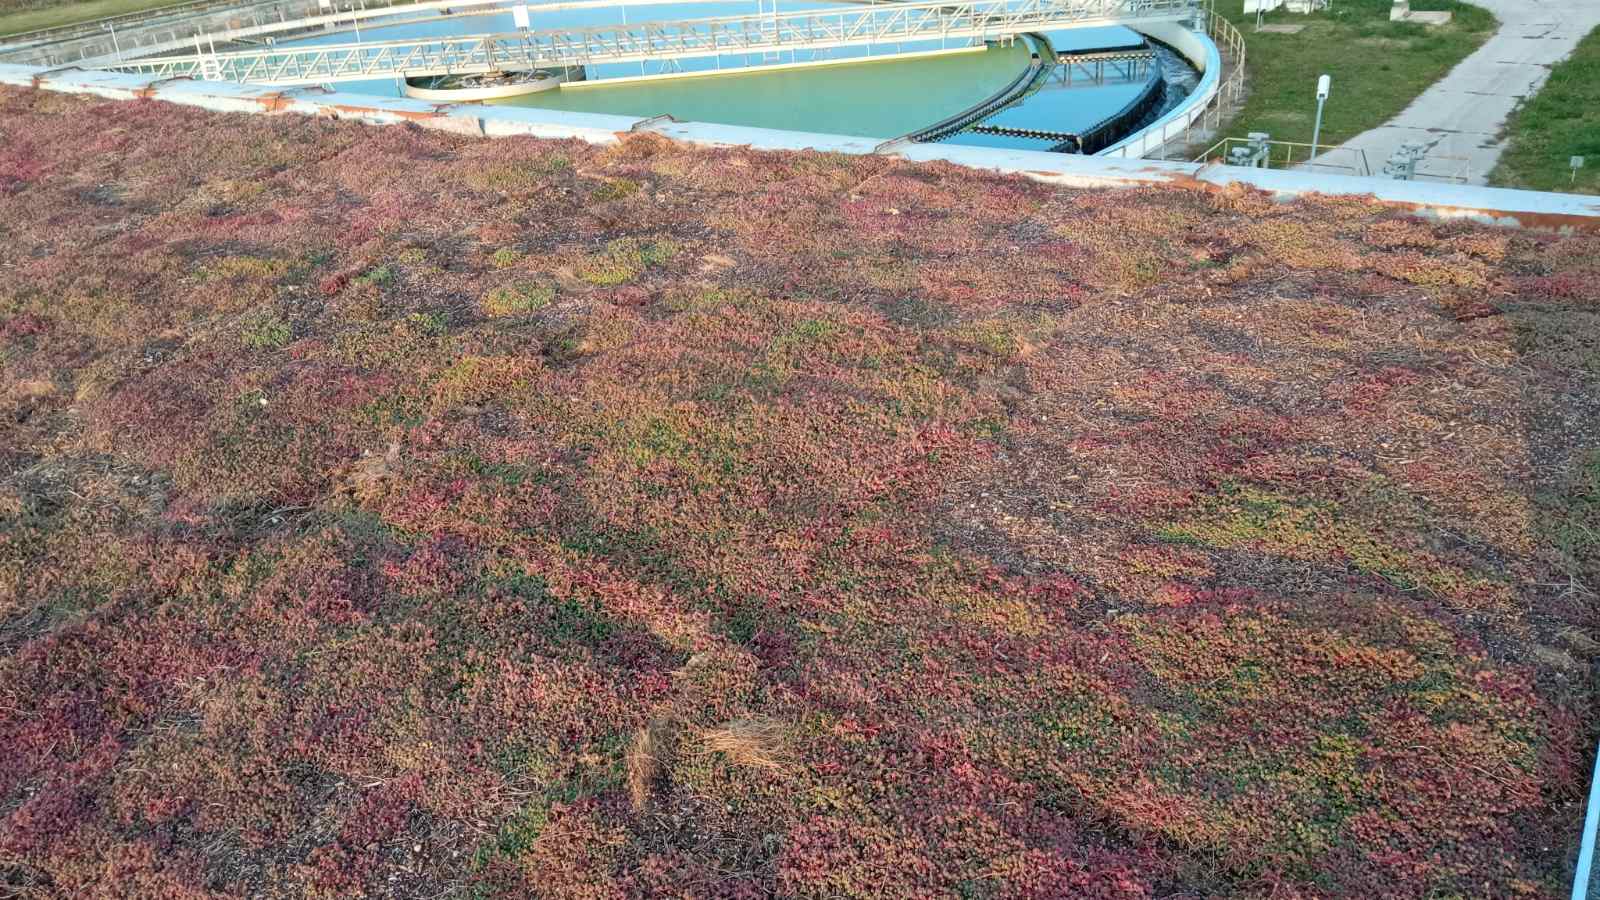 Green Roof at Kubratovo SWWTP is the new scientific experiment of Sofiyska Voda and its partners from “CLEAN and CIRCLE”